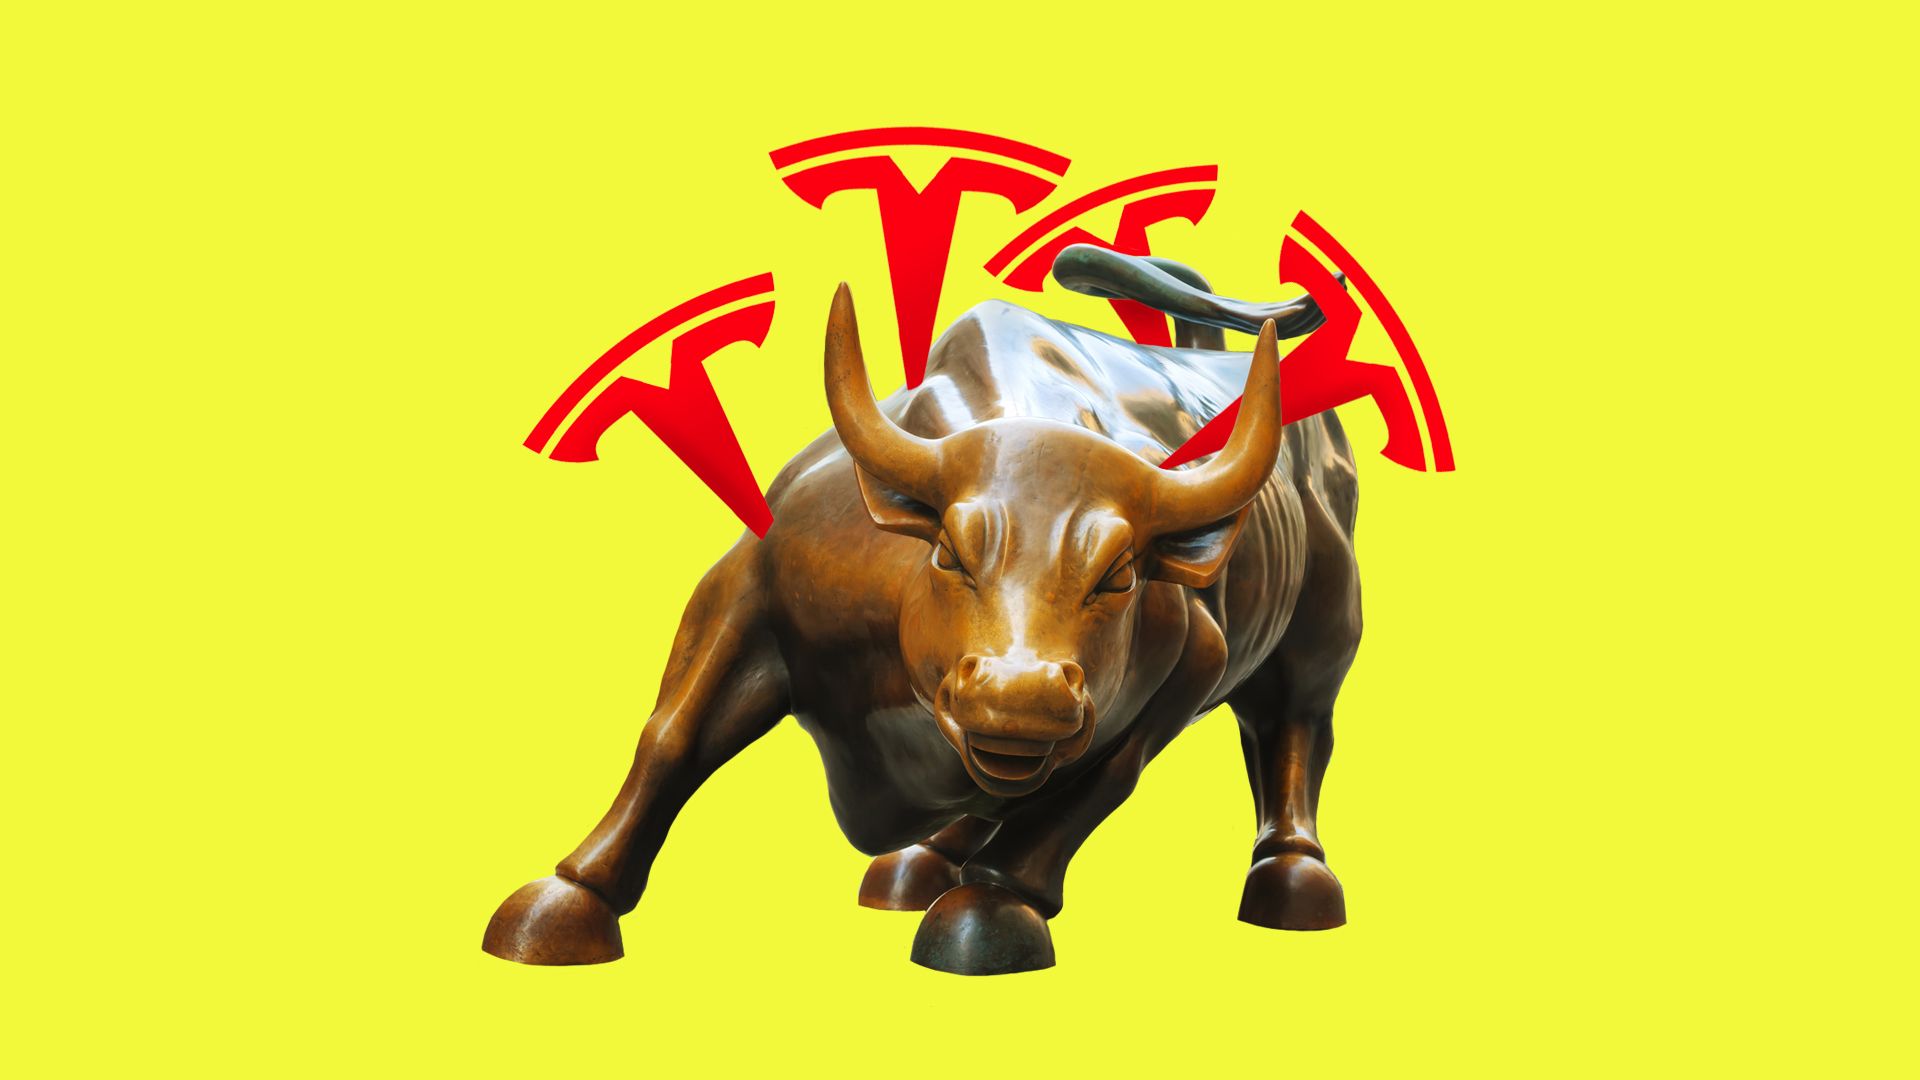 The Wall Street Bull being punctured by Tesla logos